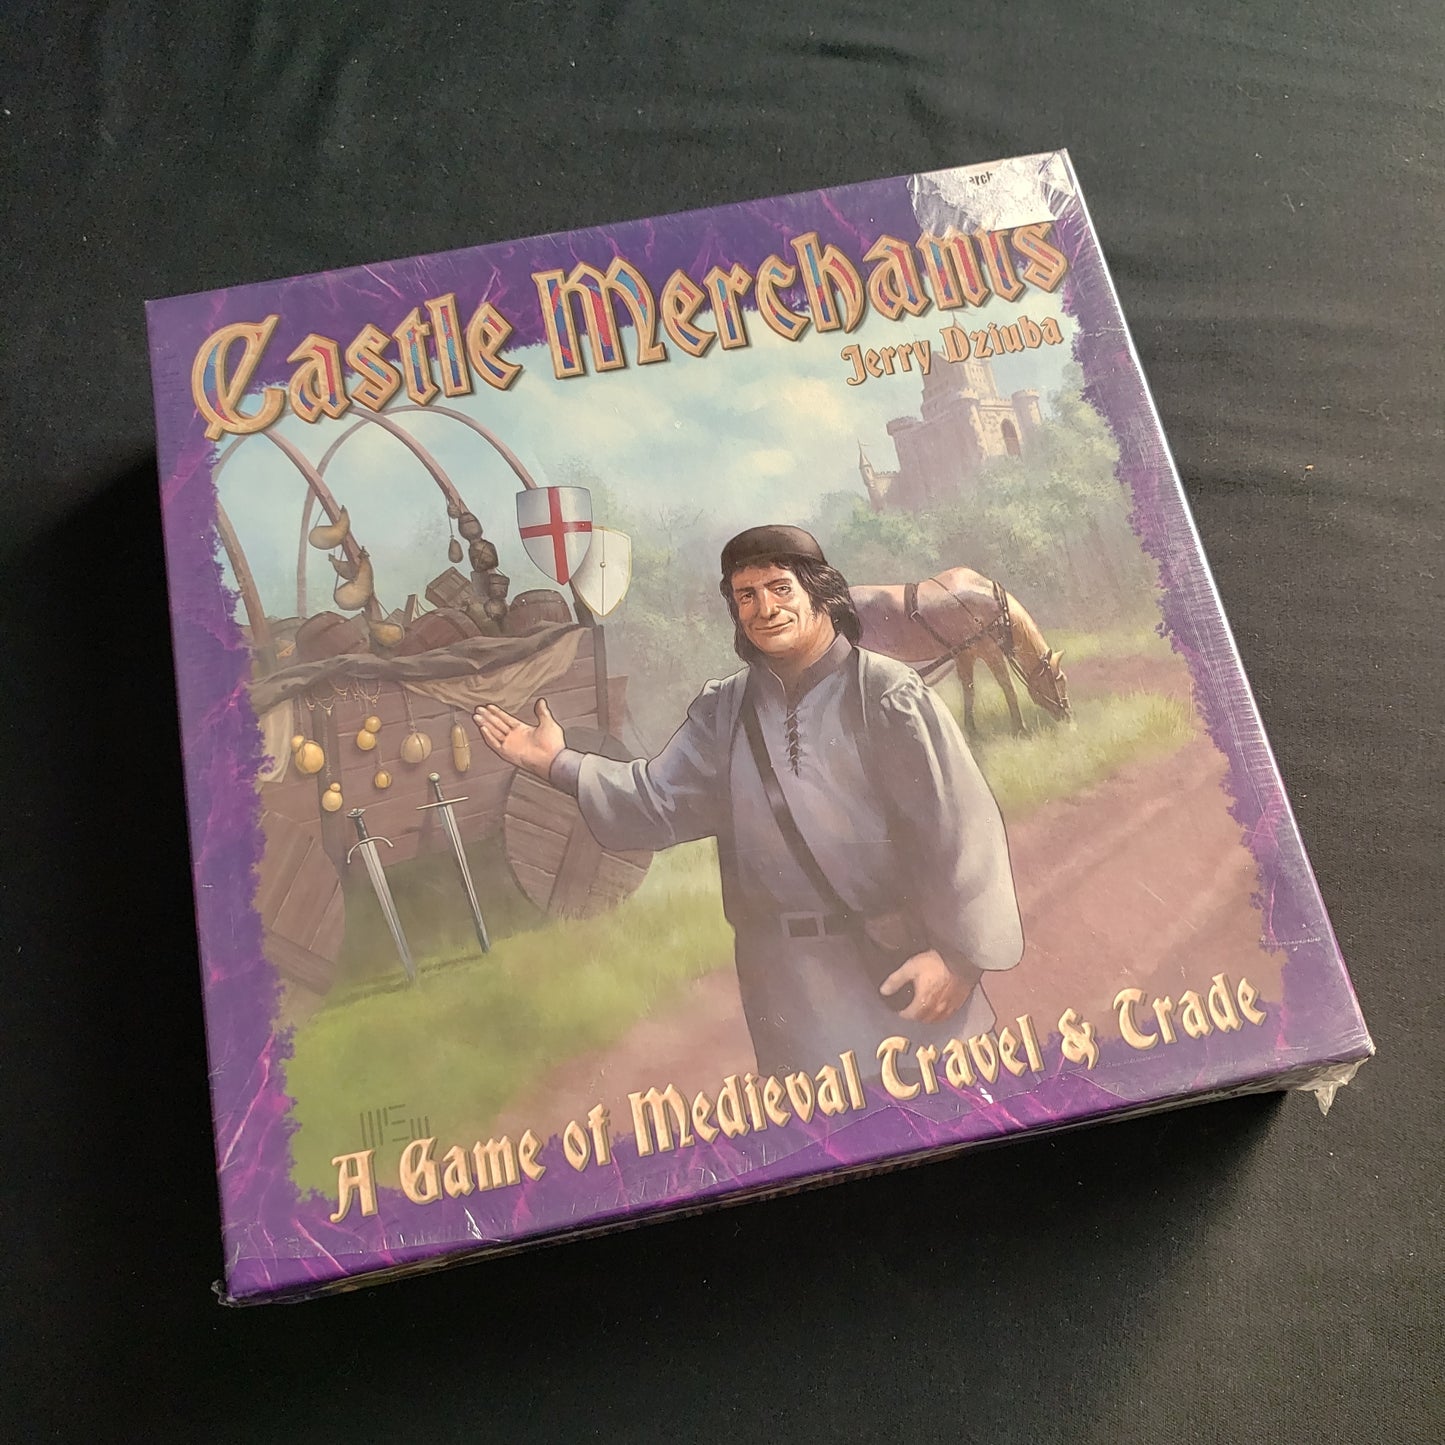 Image shows the front cover of the box of the Castle Merchants board game